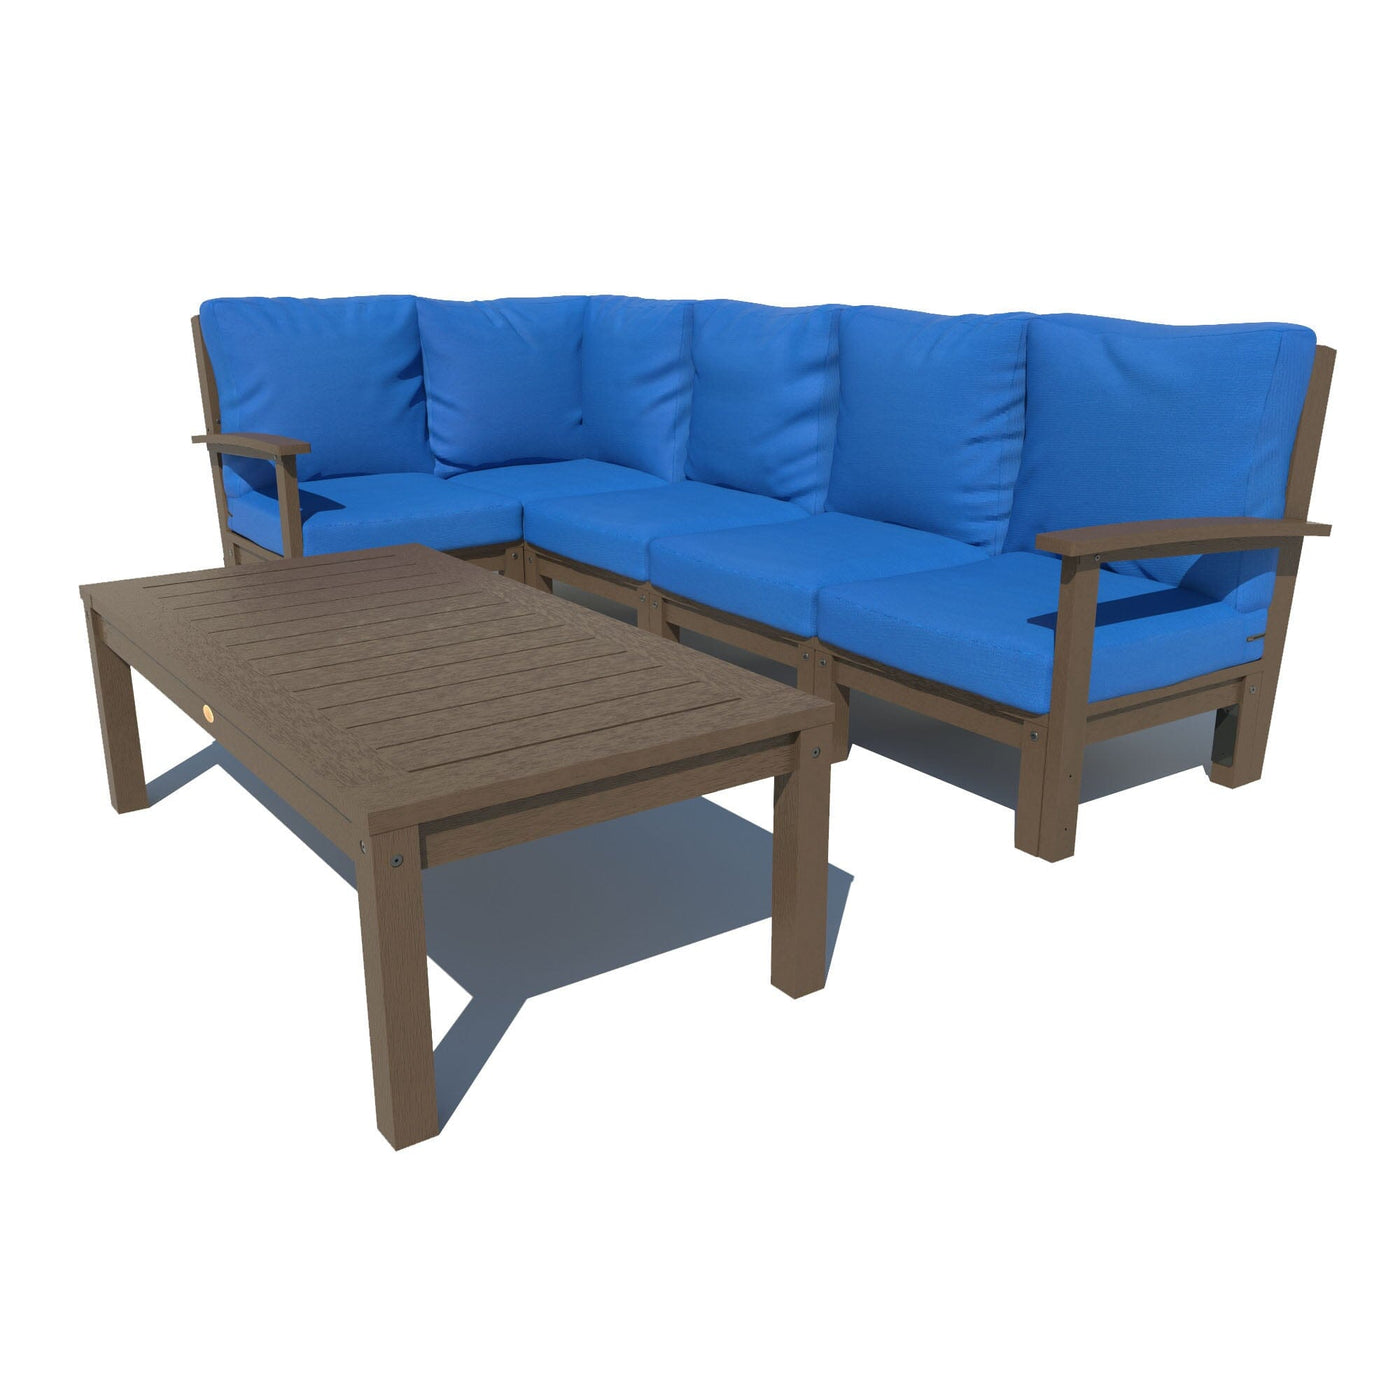 Bespoke Deep Seating: 6 Piece Sectional Set with Conversation Table Deep Seating Highwood USA Cobalt Blue Weathered Acorn 